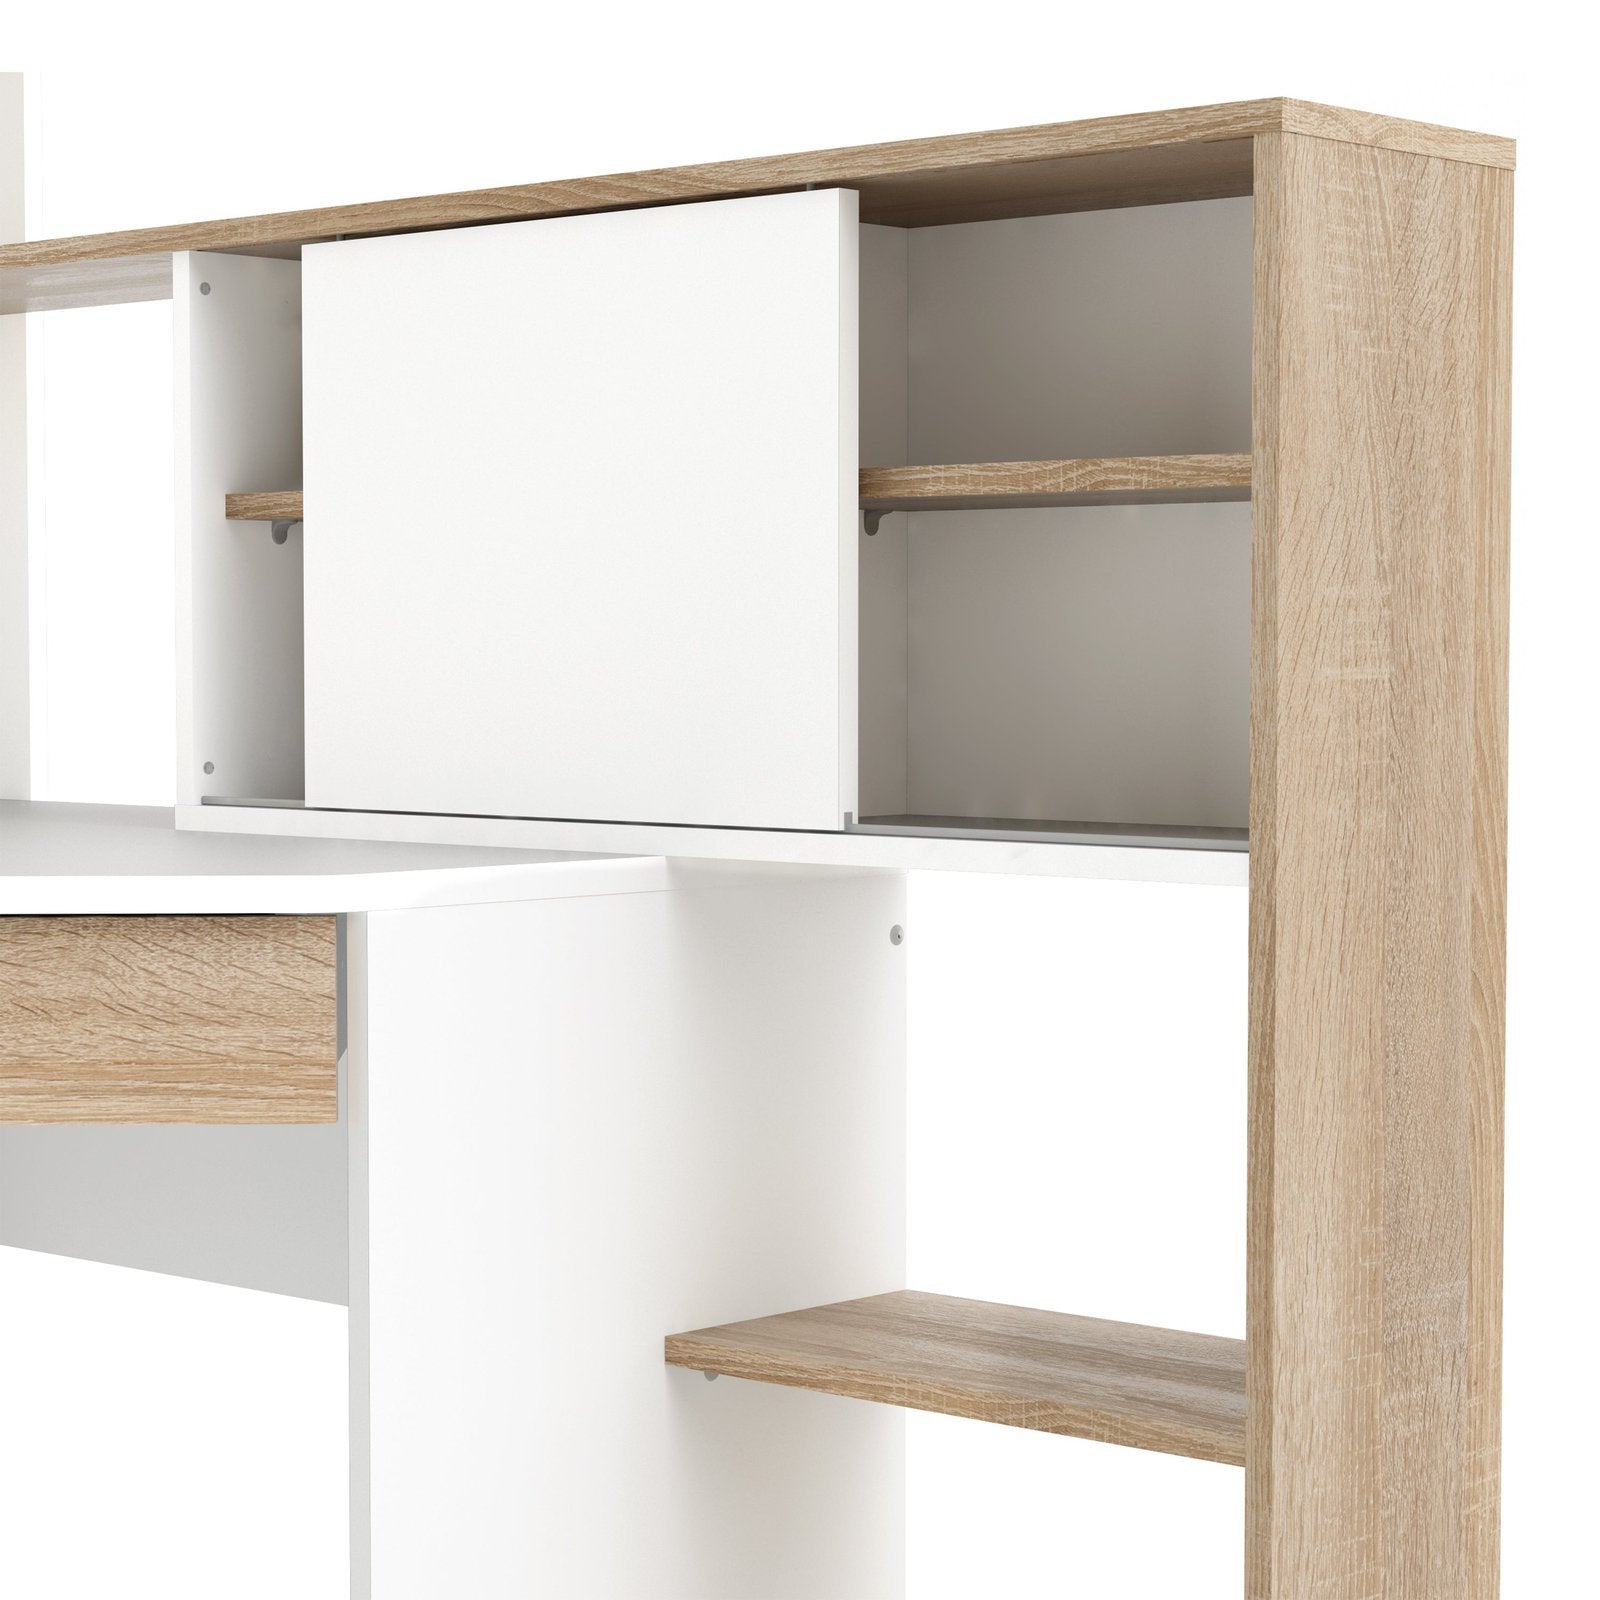 Function Plus Corner Desk with multi-functional unit In White and Oak